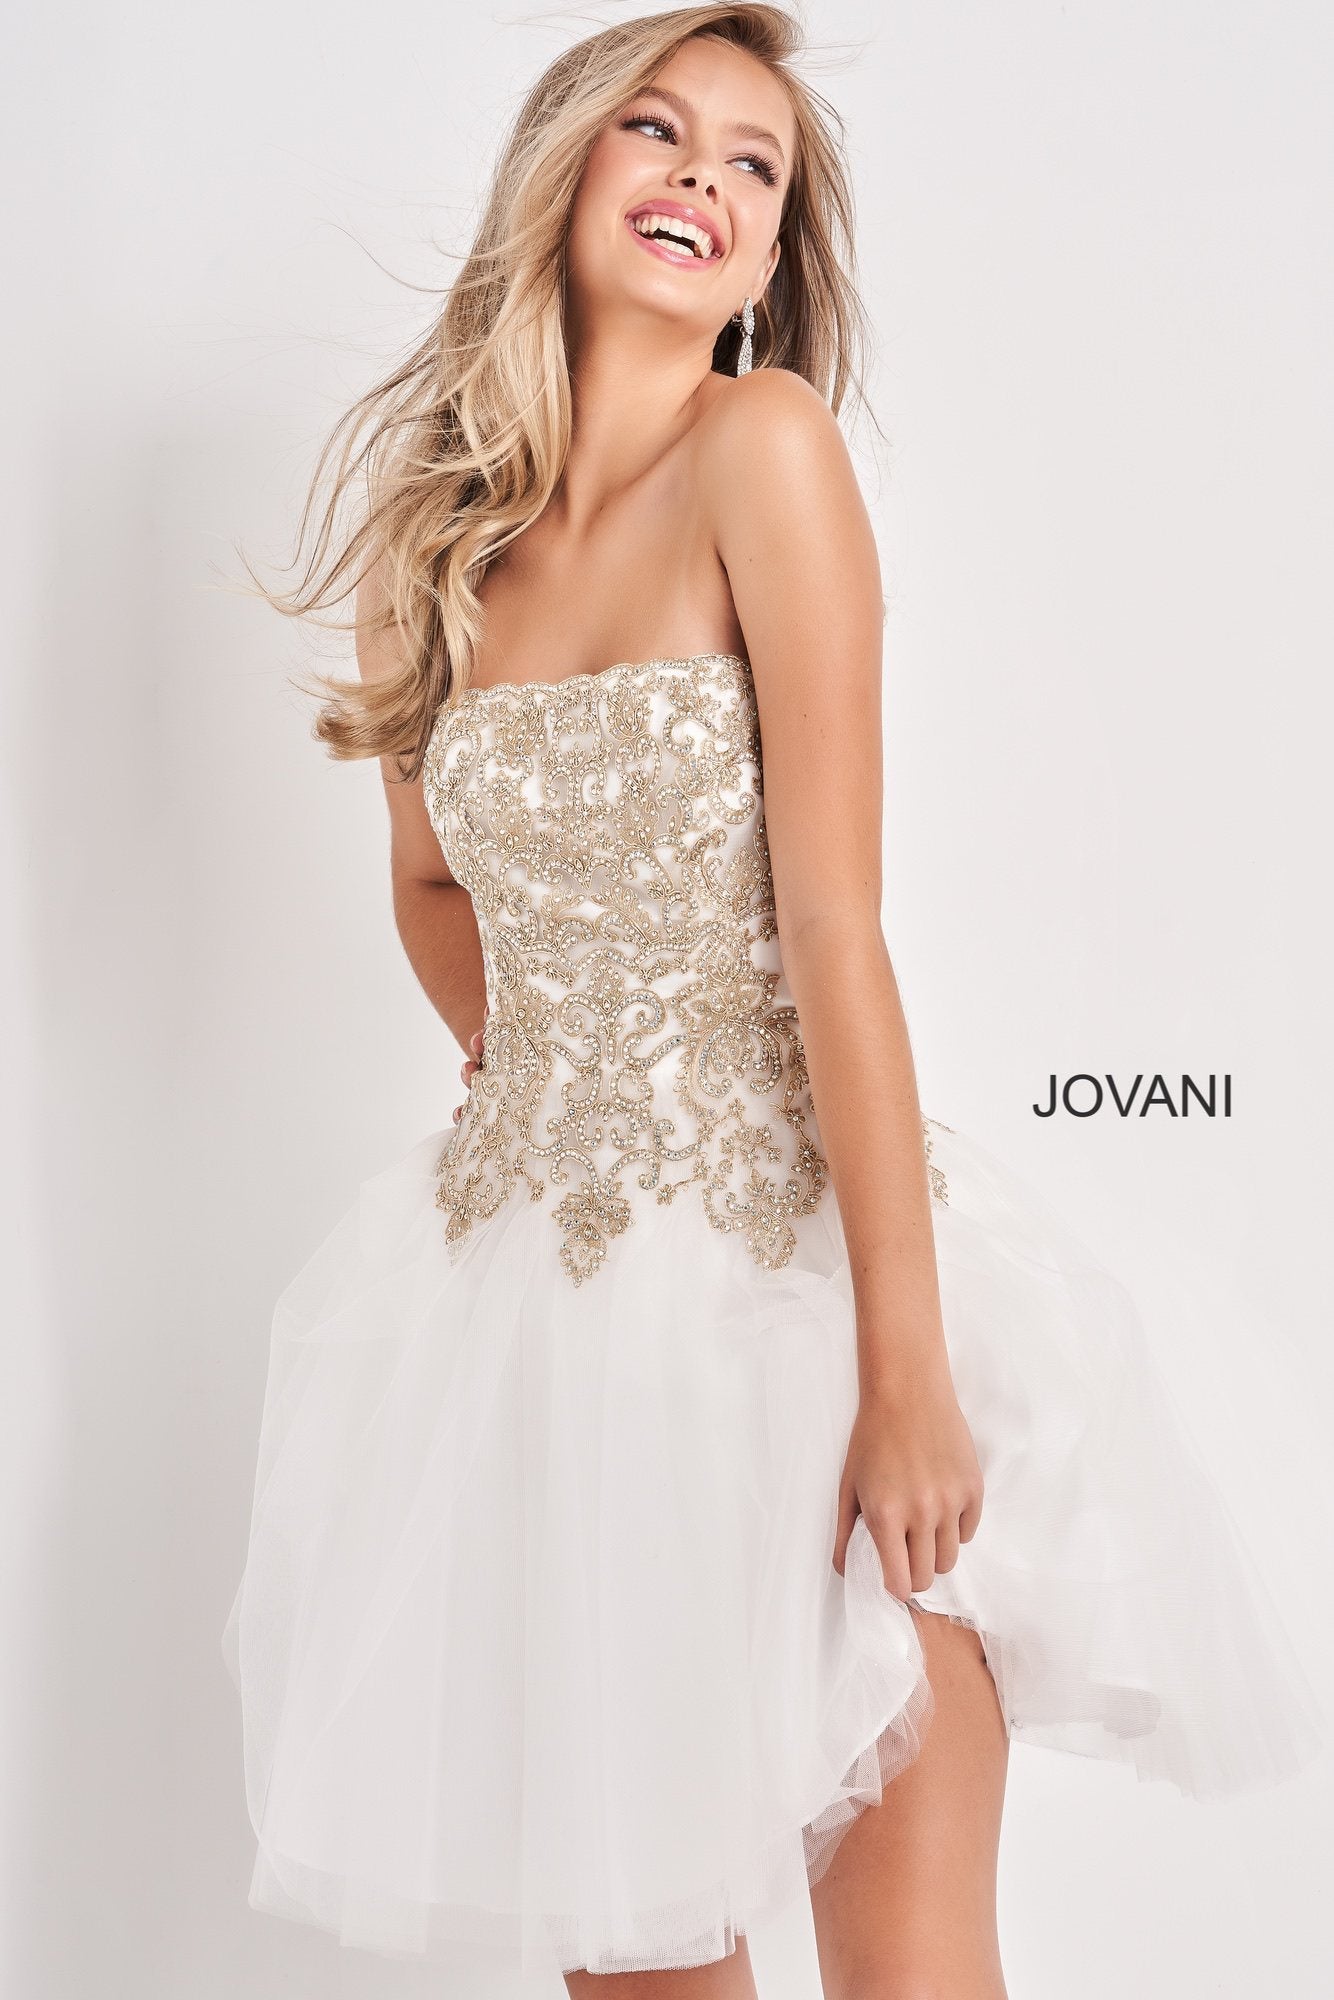 Jovani Kids k66720 is a Short Girls Party Dress, Kids Pageant Gown & Pre Teen Formal Evening Wear gown. This Strapless Straight neckline Girls Gown Features an Embellished Embroidered Applique for a stunning scallop Bedazzled Bodice with a classic look. Flared Tulle skirt.  Available Girls Sizes: 8, 10, 12, 14  Available Colors: Pale Pale Blue, White